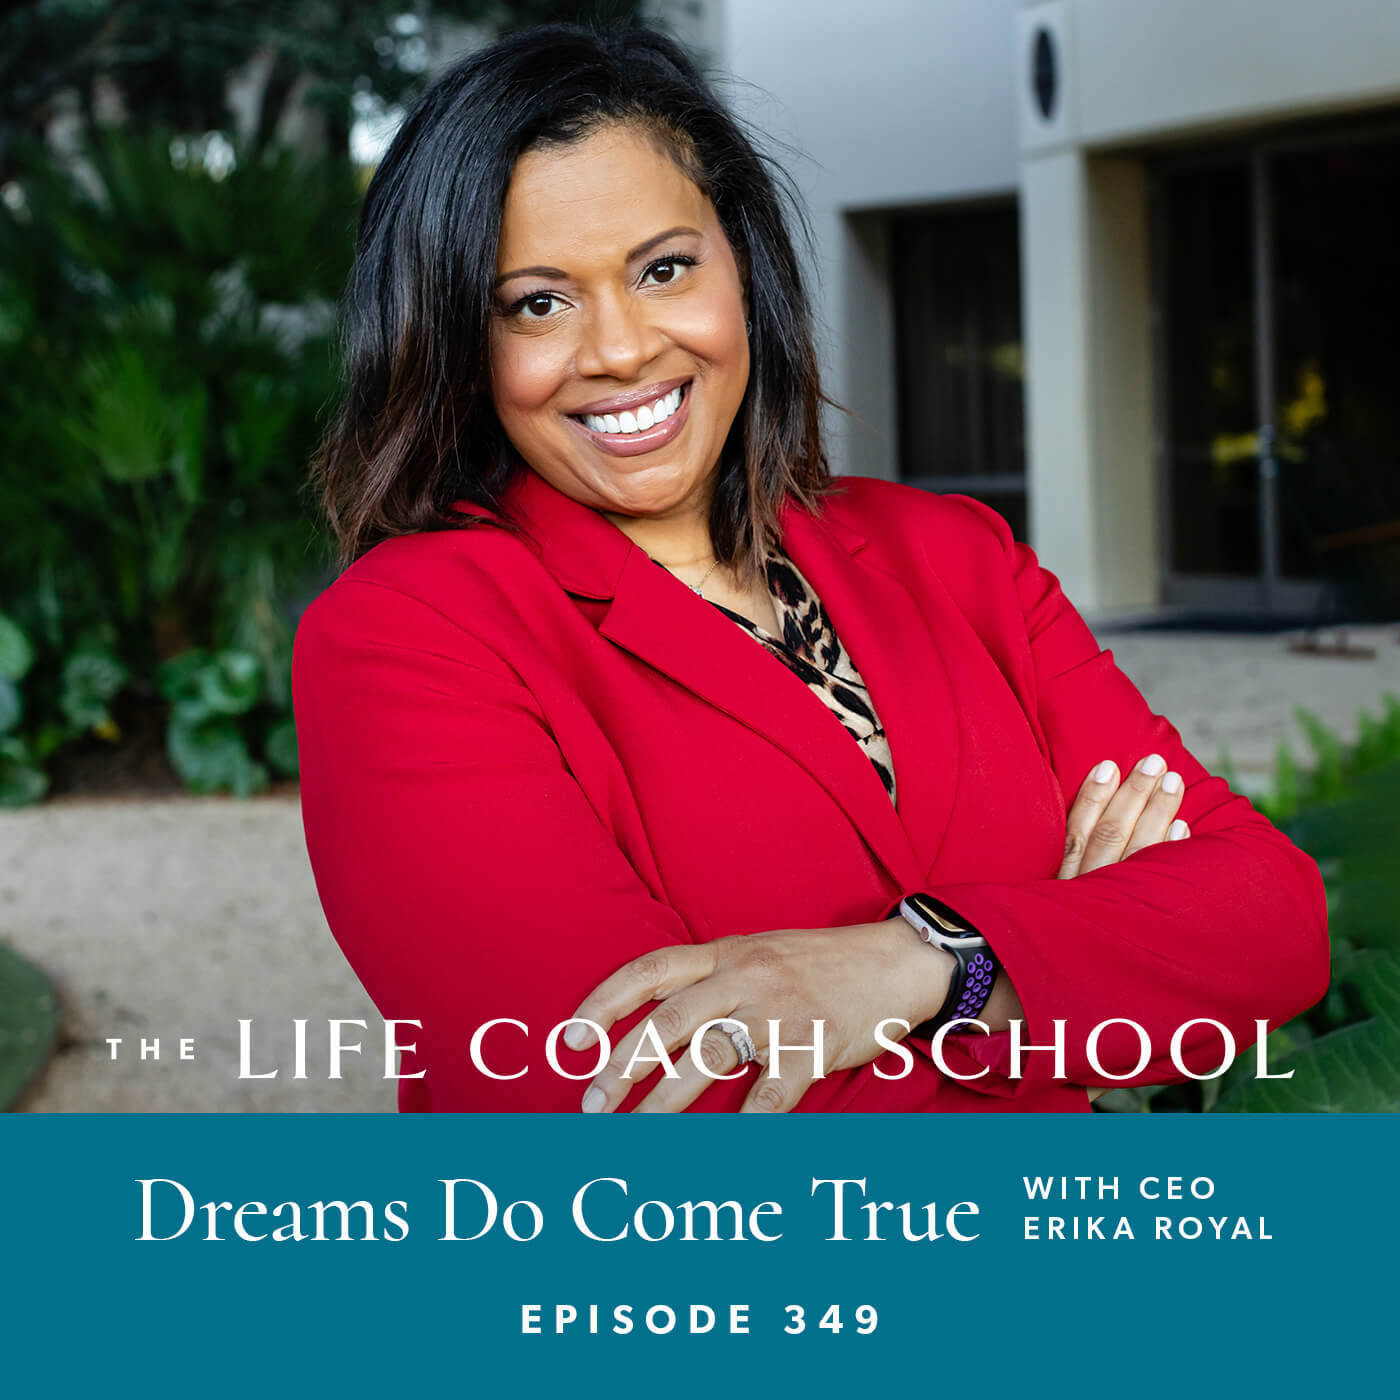 The Life Coach School Podcast with Brooke Castillo | Dreams Do Come True with CEO Erika Royal